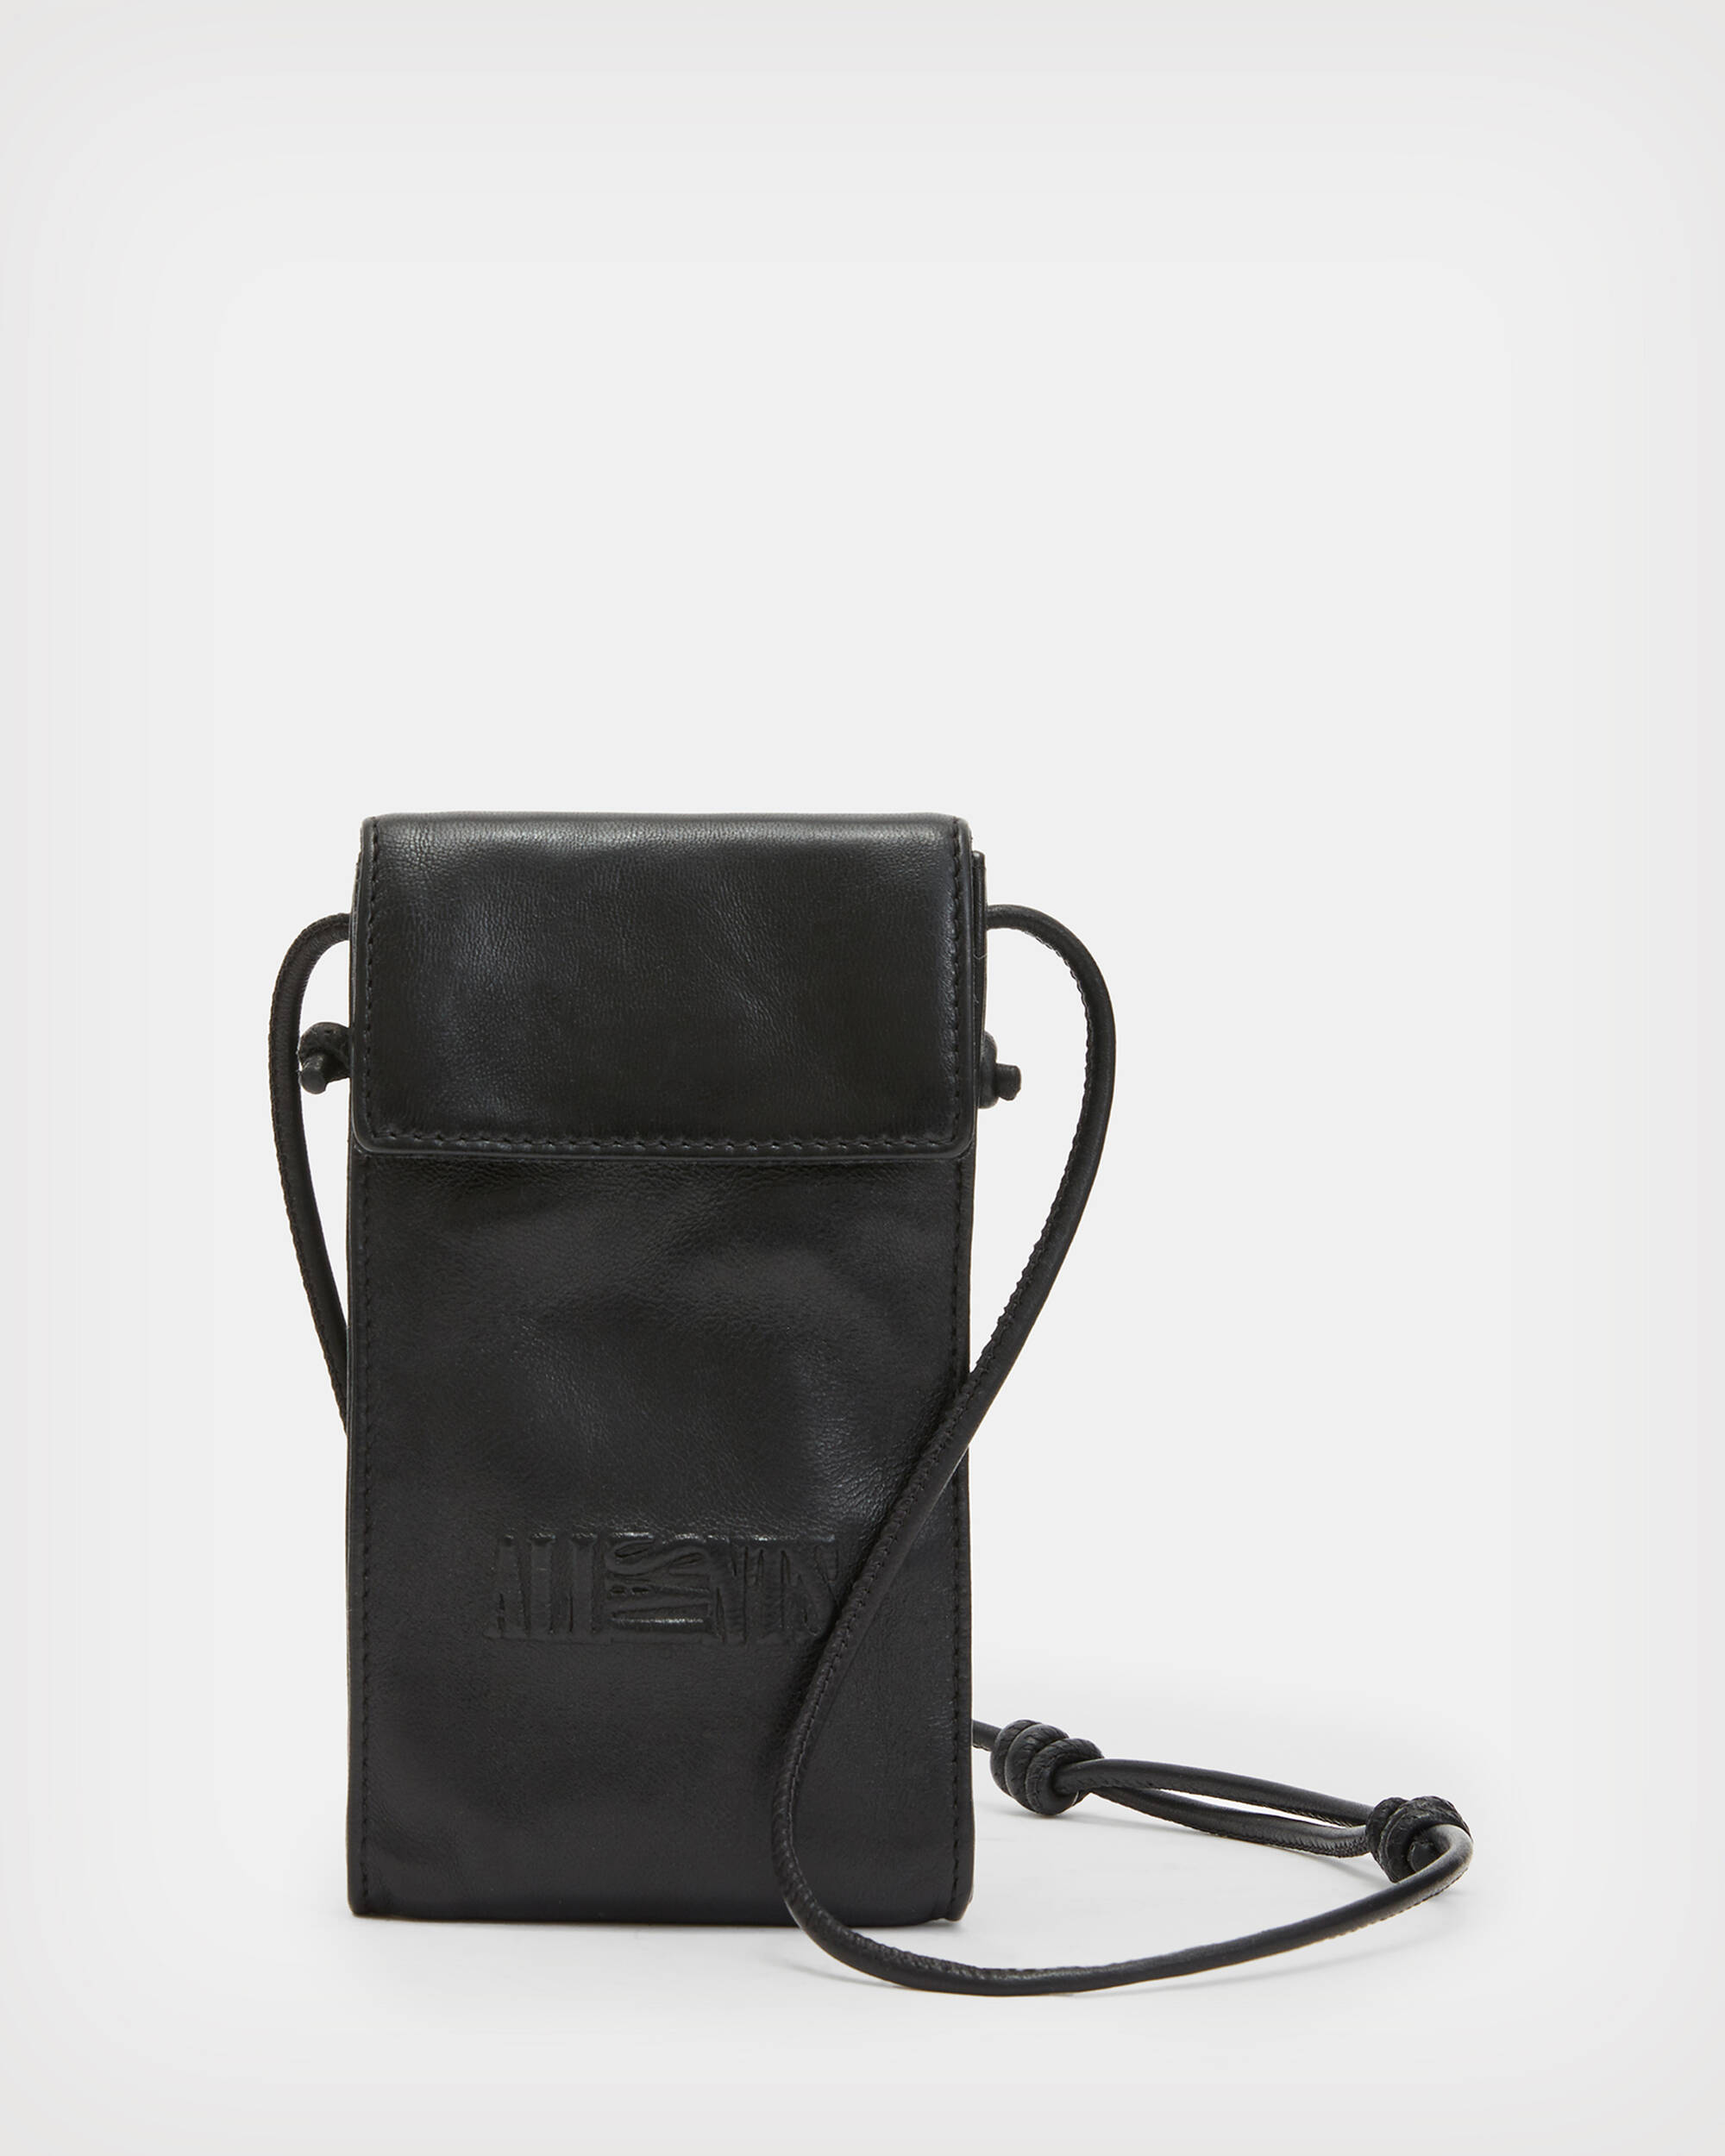 Oppose Embossed Leather Phone Pouch Black | ALLSAINTS US